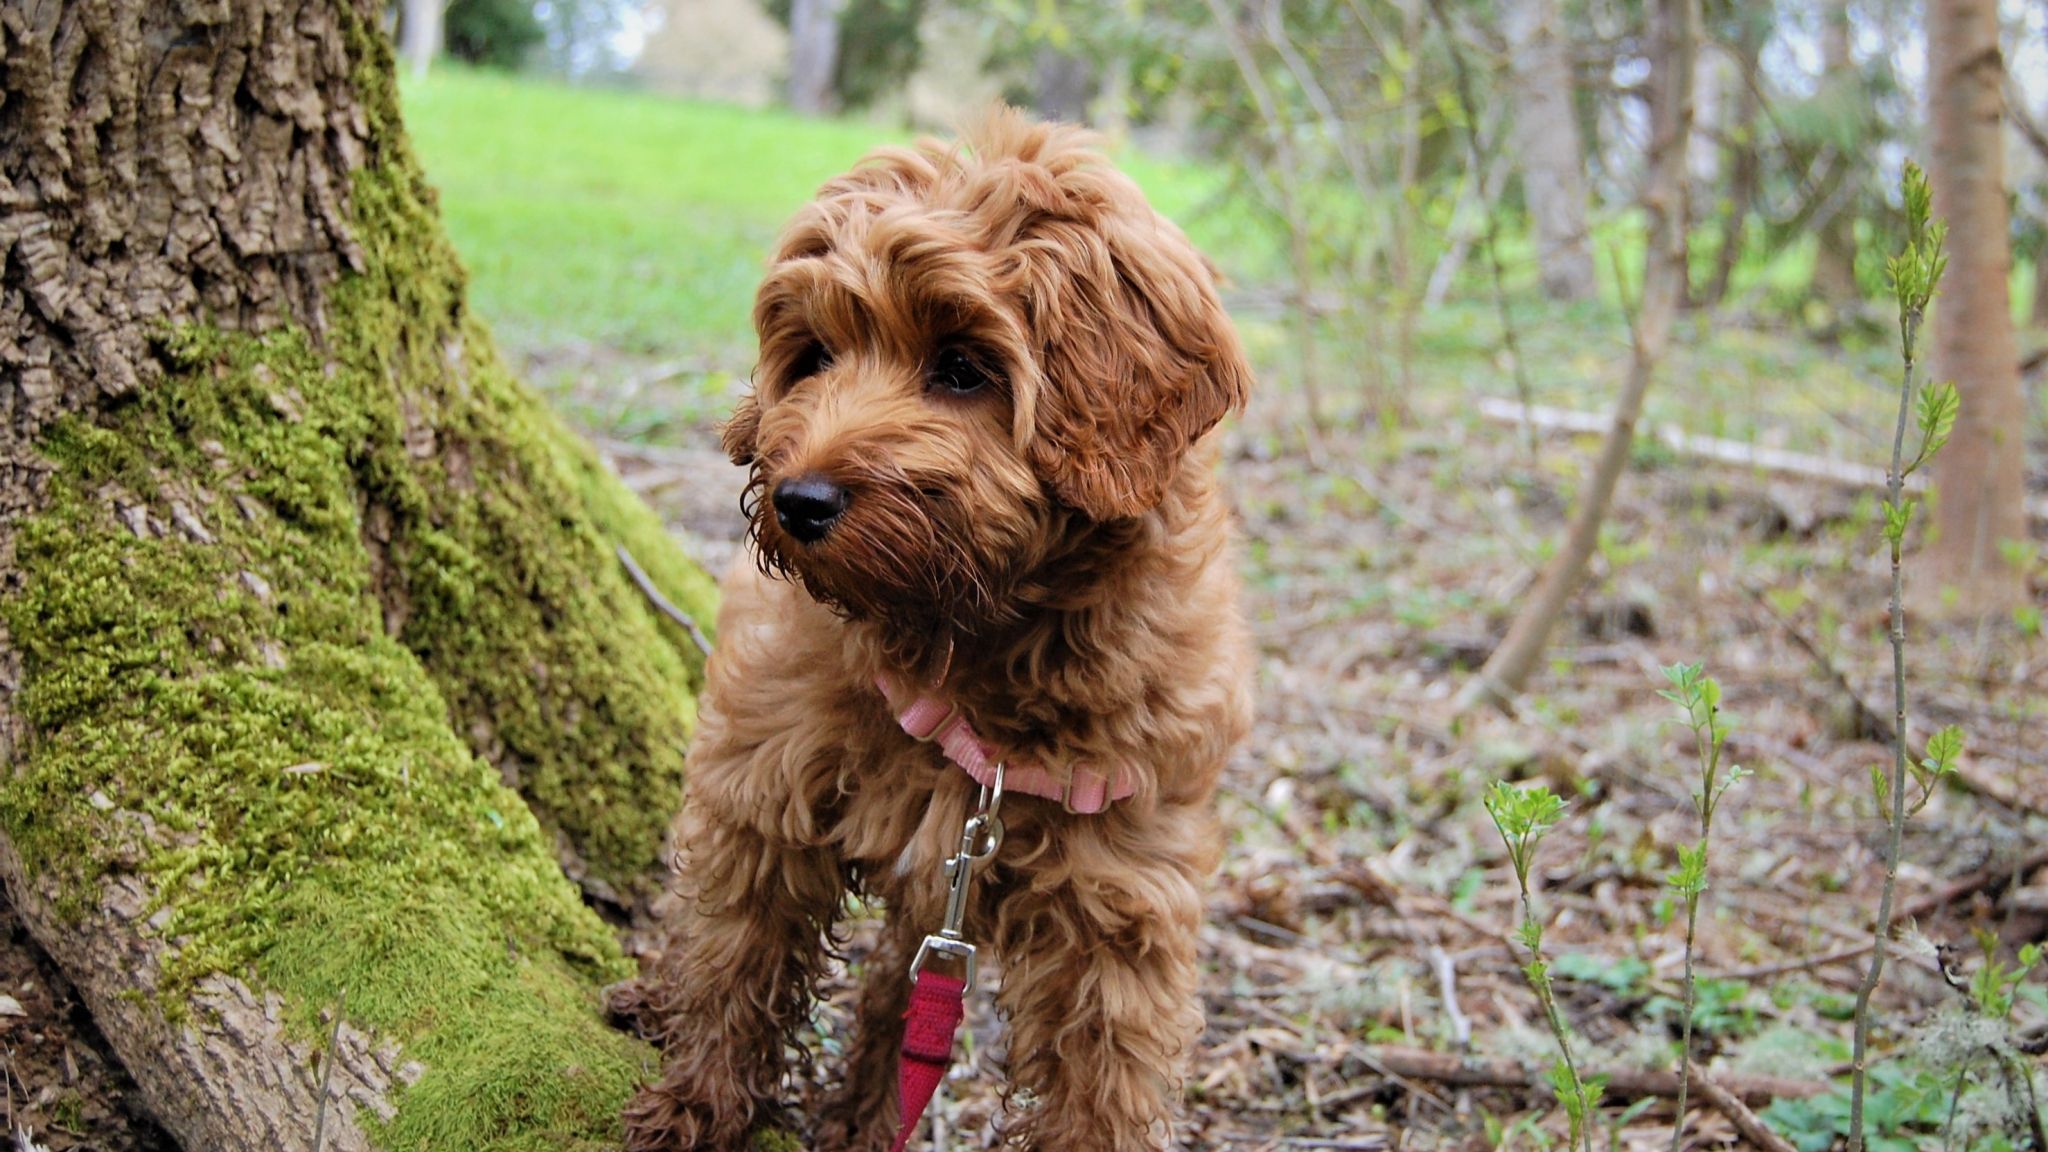 Desktop Wallpaper Puppy, Cut Dog, Labradoodle, Dog, Outdoor, HD Image, Picture, Background, Lzxyo